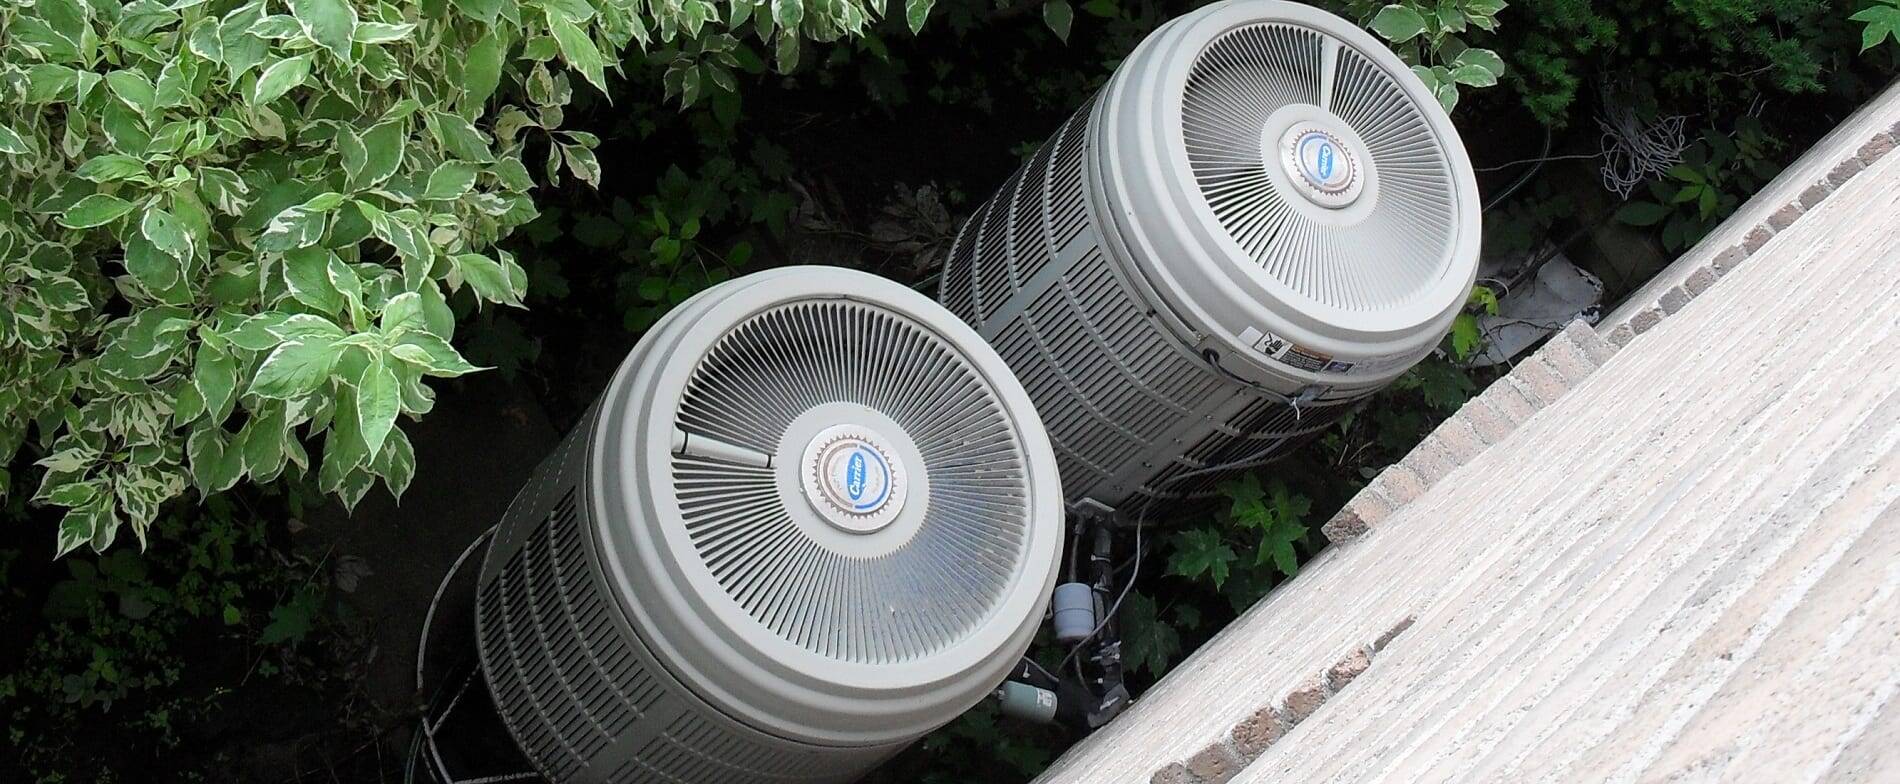 ESO raises projections for ground-source heat pumps